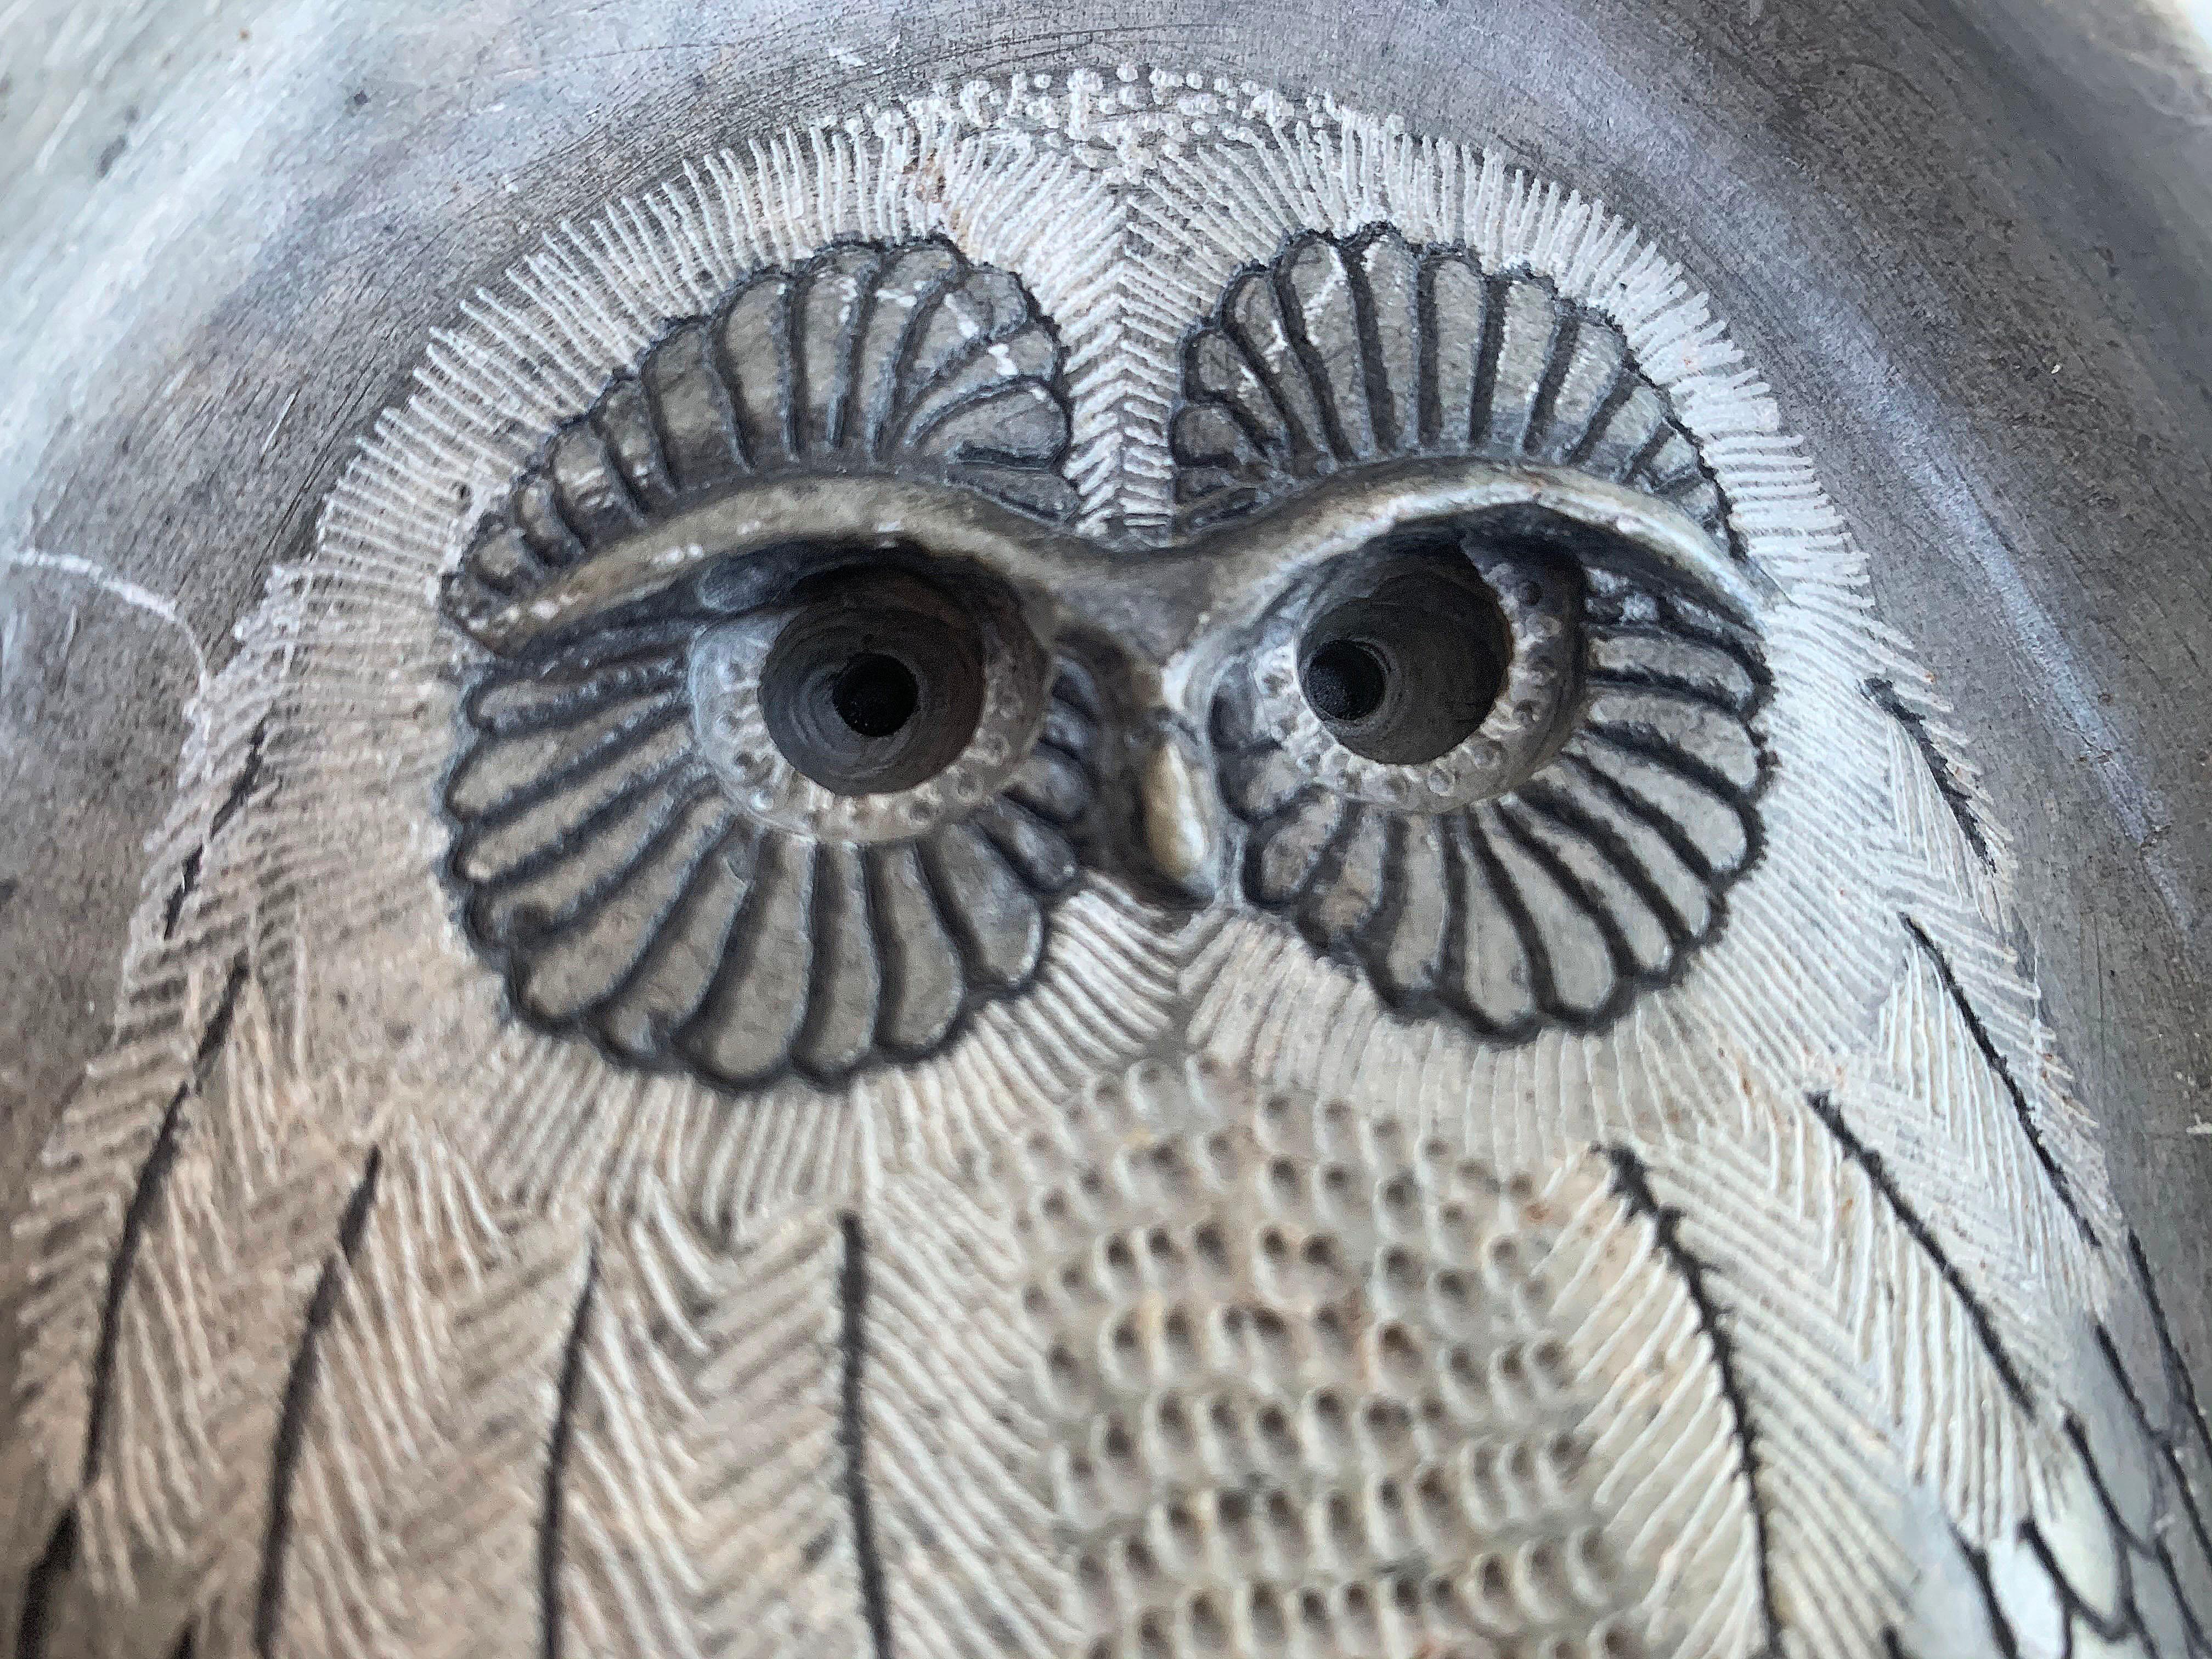 Stone sculpture by Glenn Heath, a well-known California artist. This art piece is carved on one side of a triangle shaped stone, the owl details are both fine in texture and quality. The outer crown is rough in texture and gives the piece added